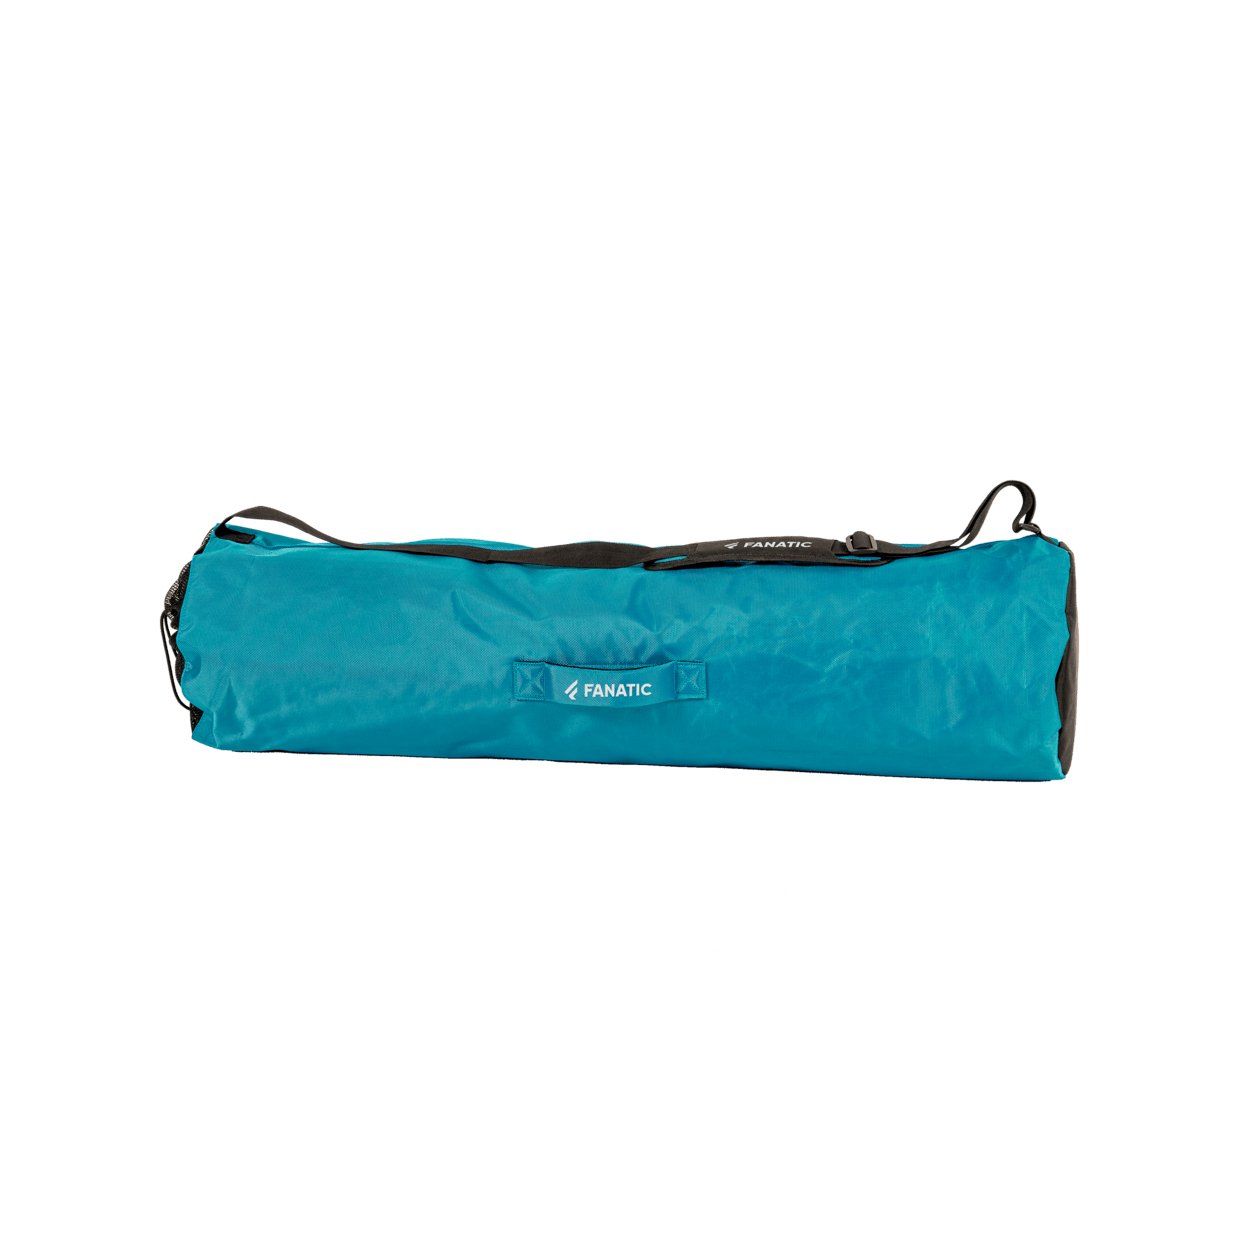 Fanatic Gearbag Air Mat 2023 - Worthing Watersports - 9008415934010 - Spareparts - Fanatic SUP